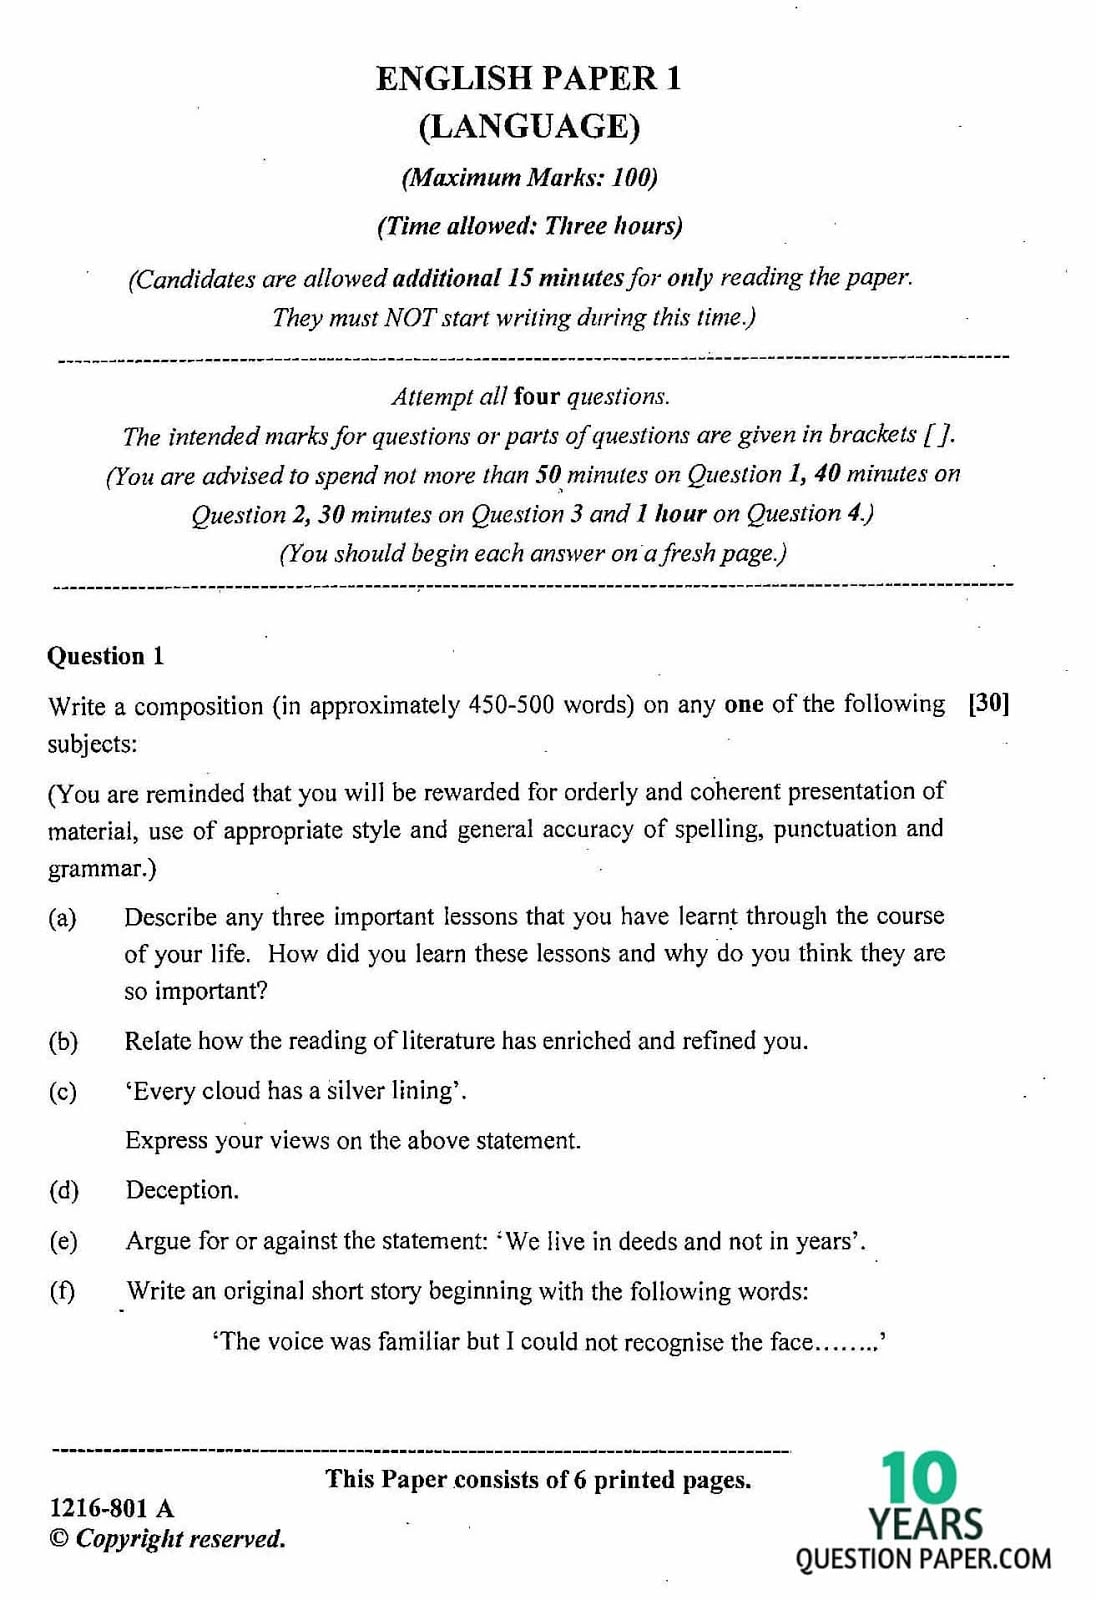 ISC Class 12 English Language 2016 Question Paper